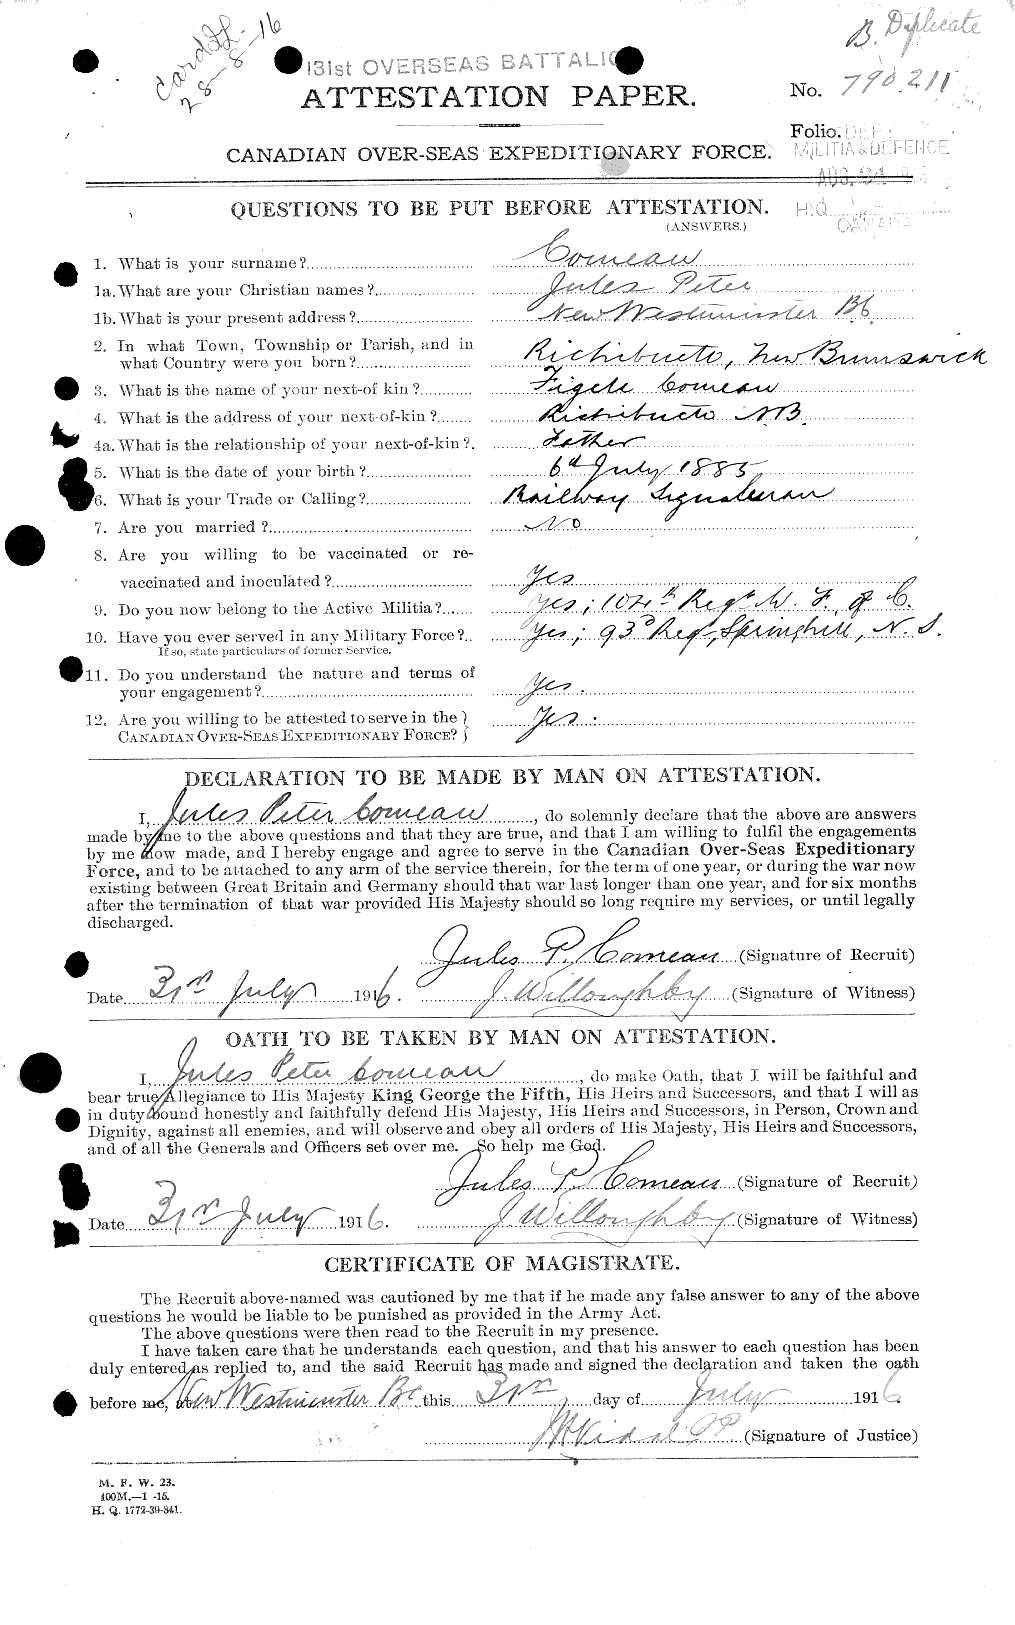 Personnel Records of the First World War - CEF 034670a